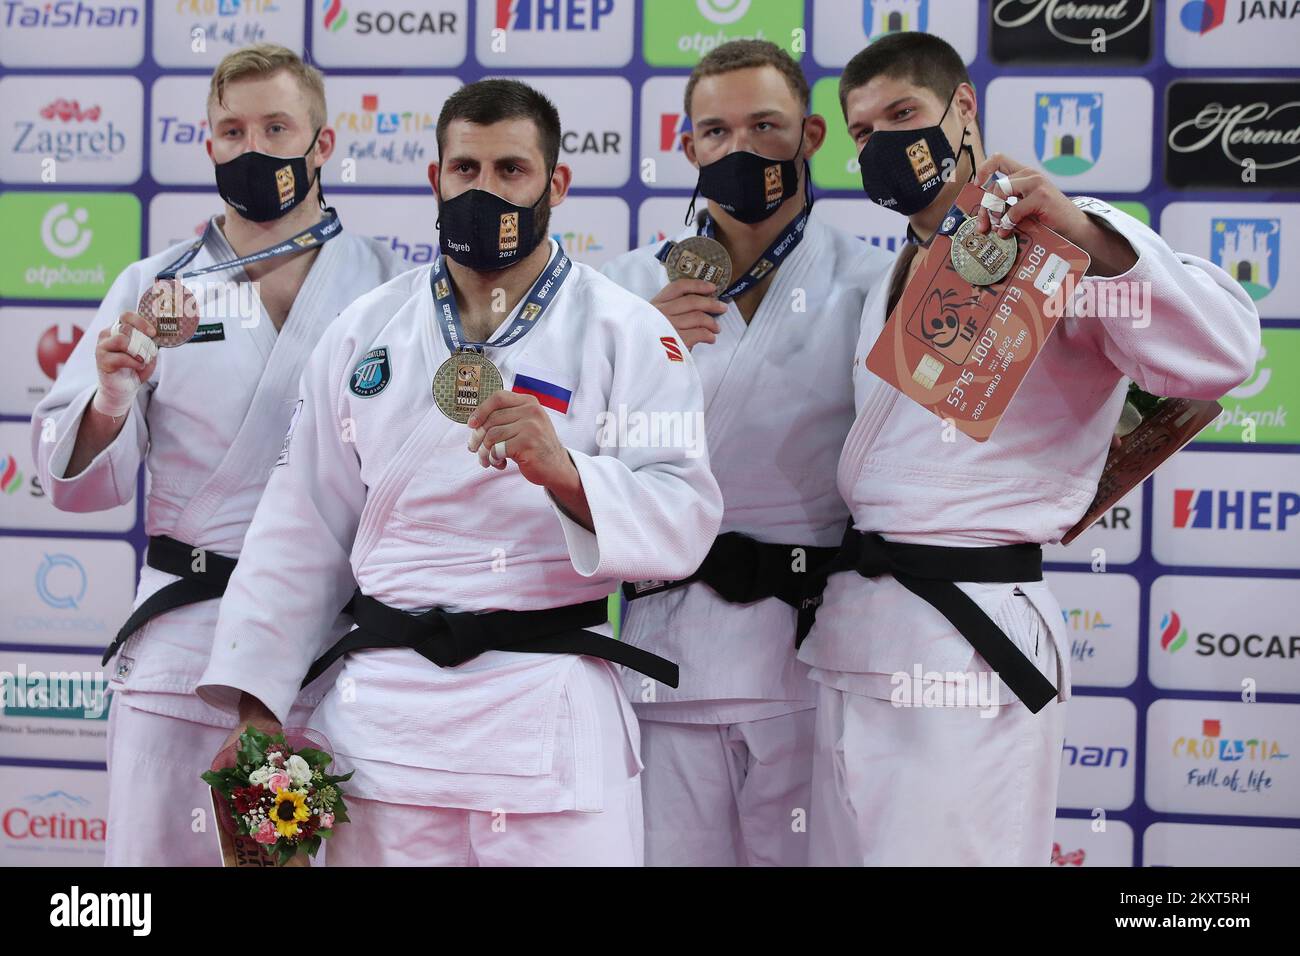 ZAGREB, CROATIA - SEPTEMBER 26: (L-R) Silver medalist Dario Kurbjeweit Garcia of Germany, gold medalist Arman Adamian of Russia and bronze medalists Simeon Catharina of Netherlands and Marko Kumric of Croatia during the Men's -100kg medal ceremony on day 3 of the Judo Grand Prix Zagreb 2021 at Arena Zagreb in Zagreb, Croatia on September 26, 2021. Photo: Igor Kralj/PIXSELL Stock Photo